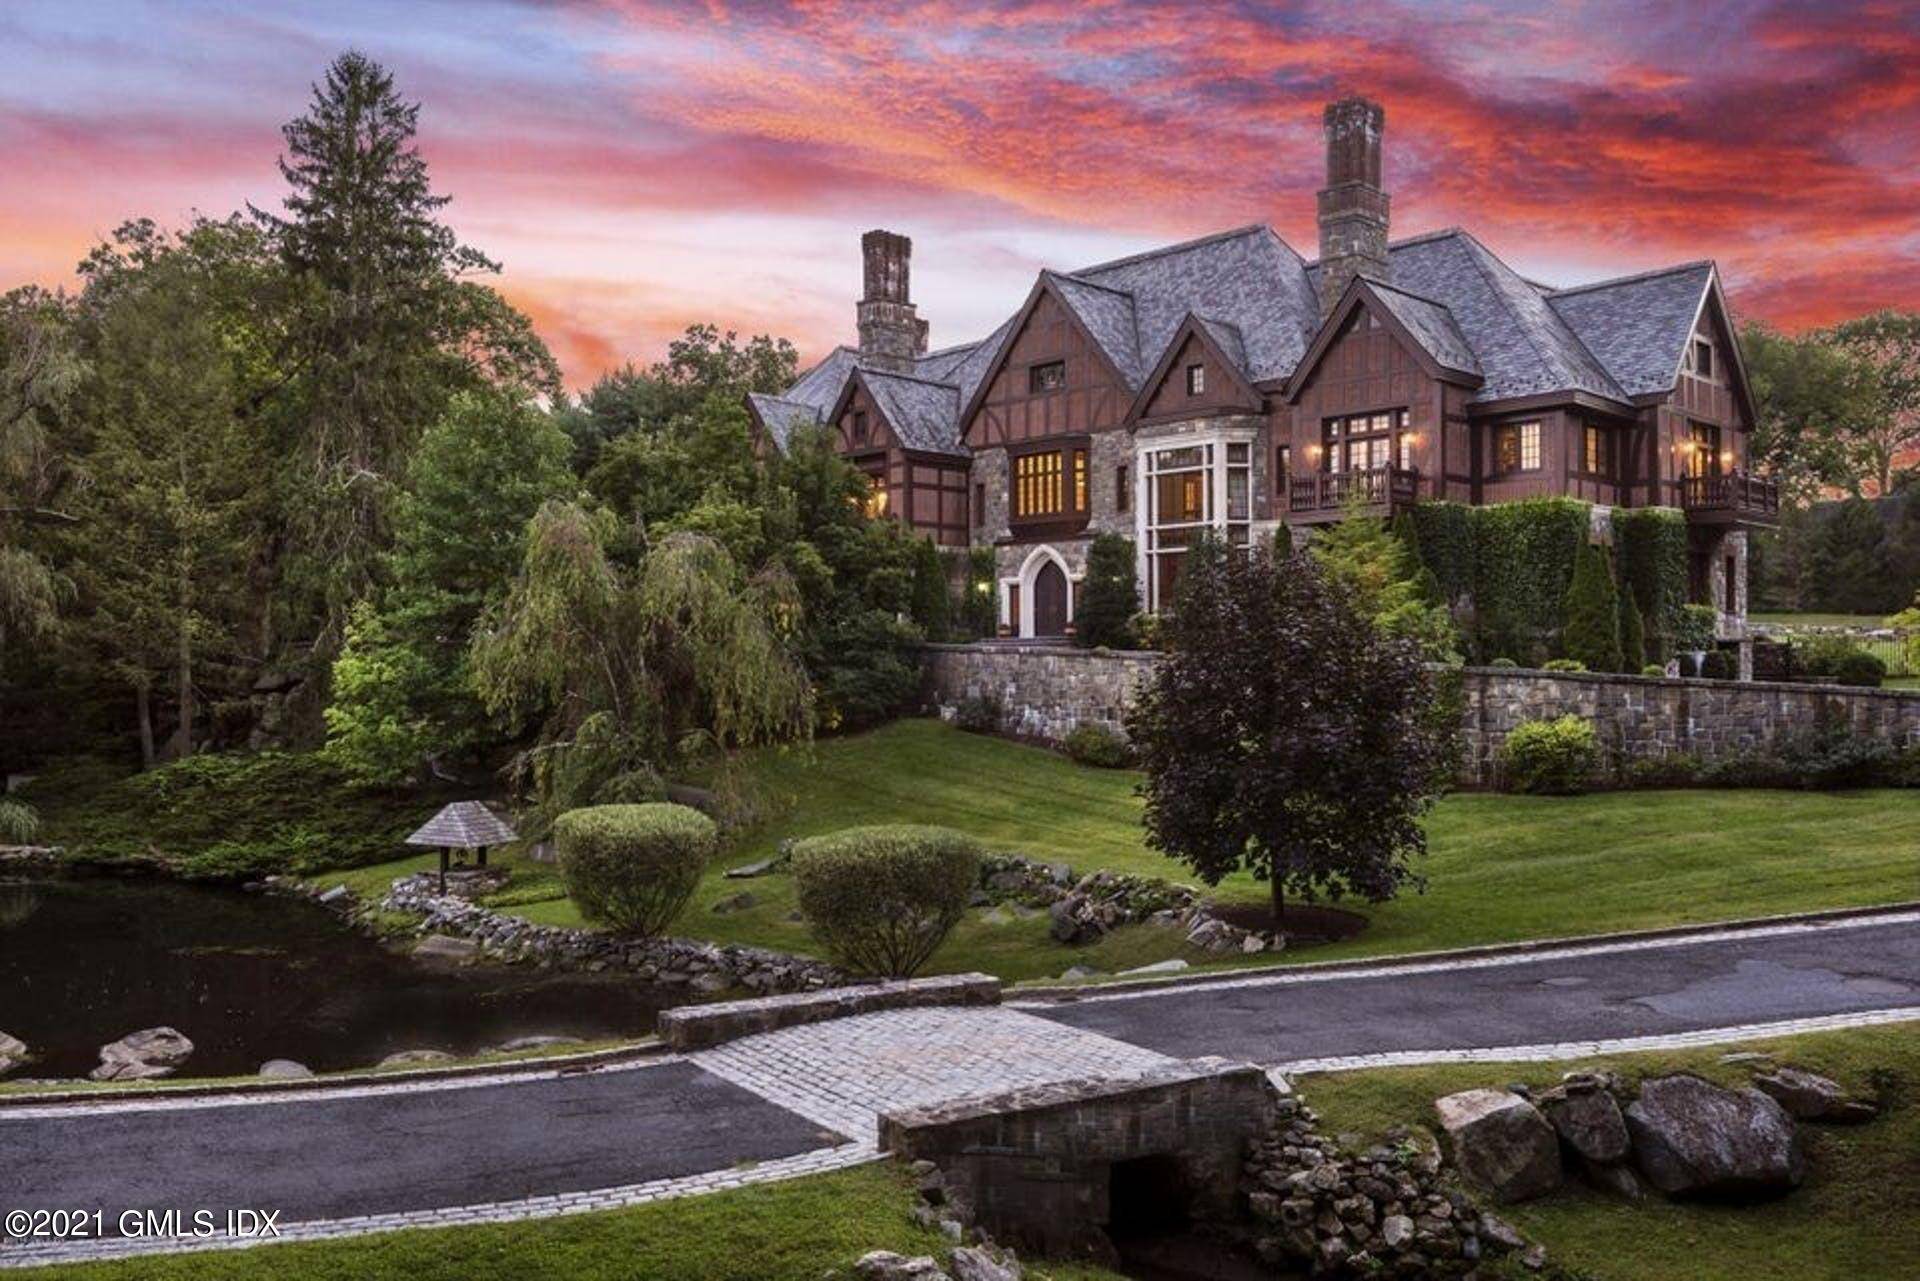 This extraordinary stone, brick and slate European manor style residence is prominently sited above a lovely free flowing pond on 4 acres in a prime mid country location.